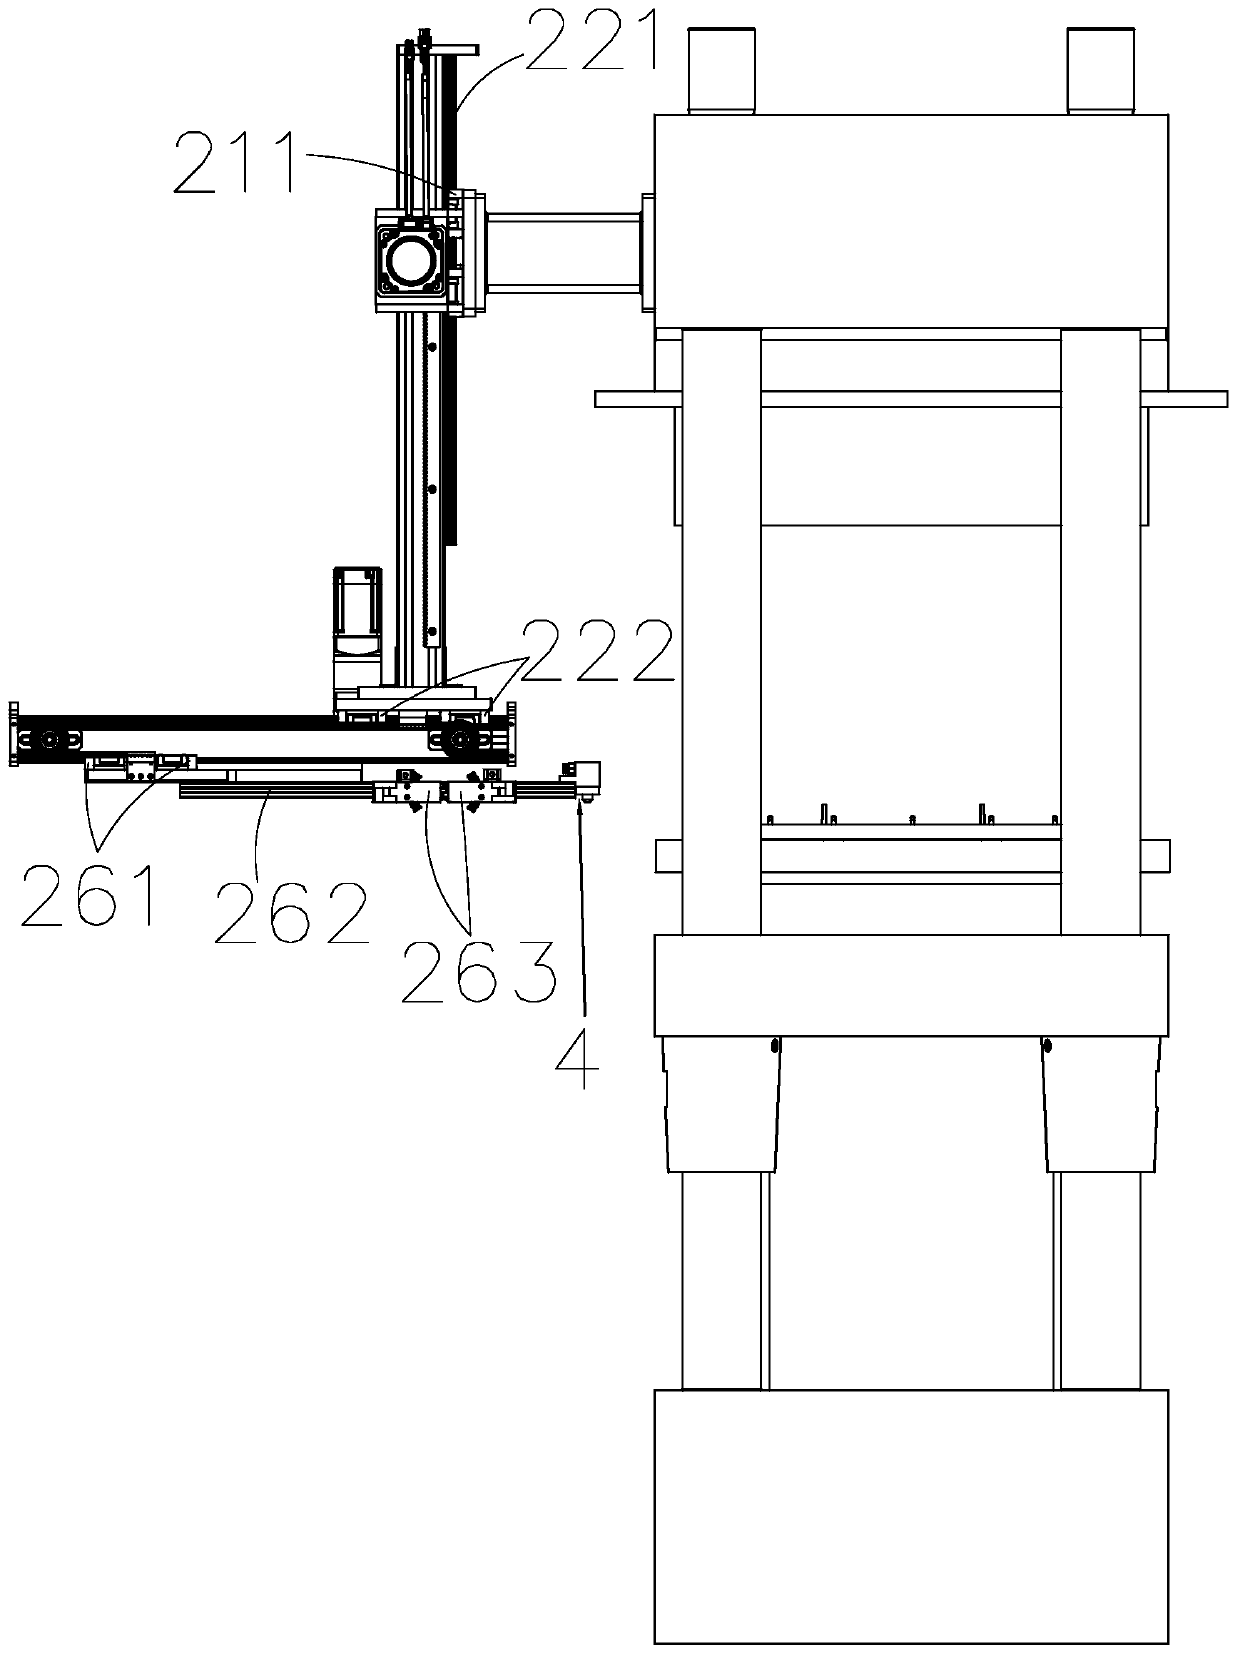 Automatic production device